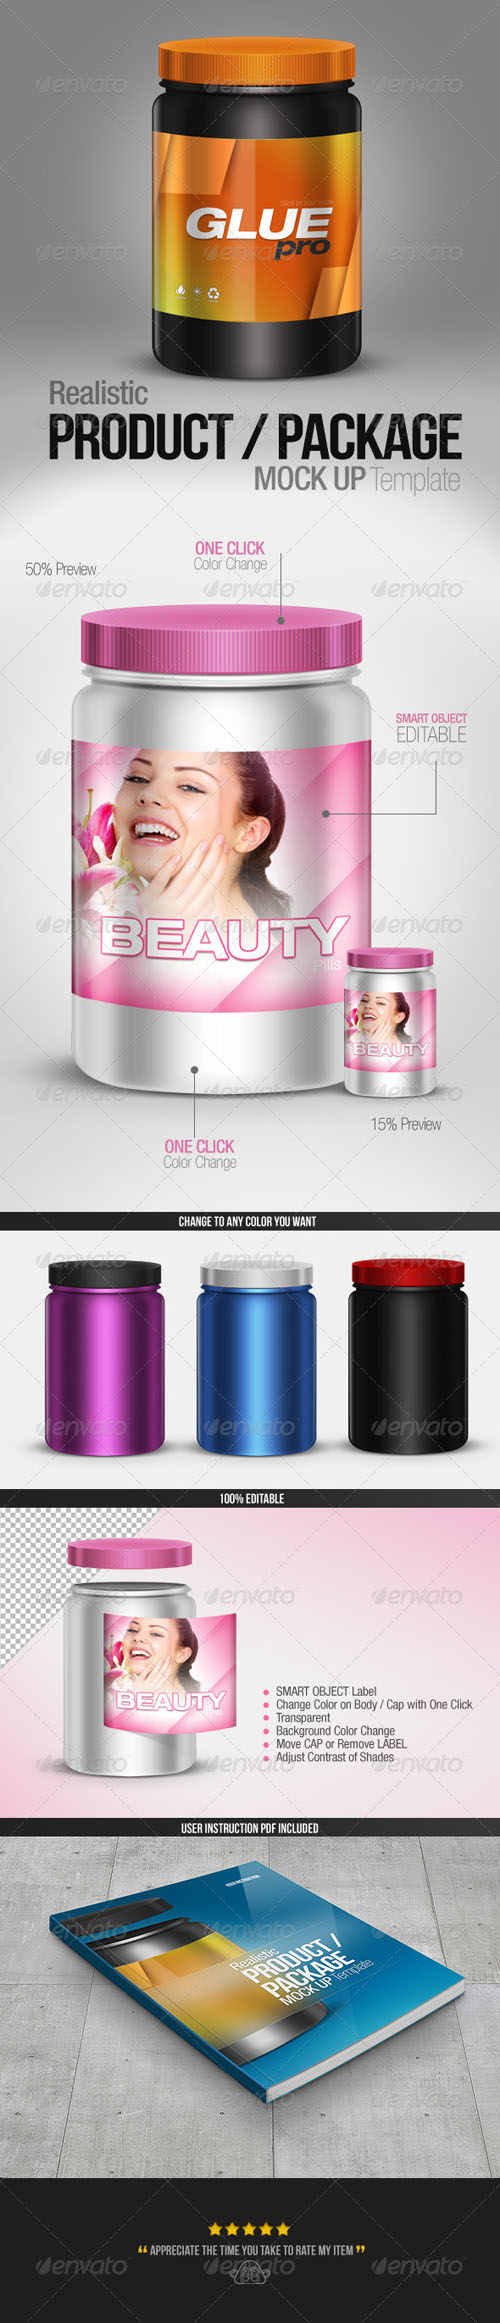 GraphicRiver - Realistic Product - Package Mock up